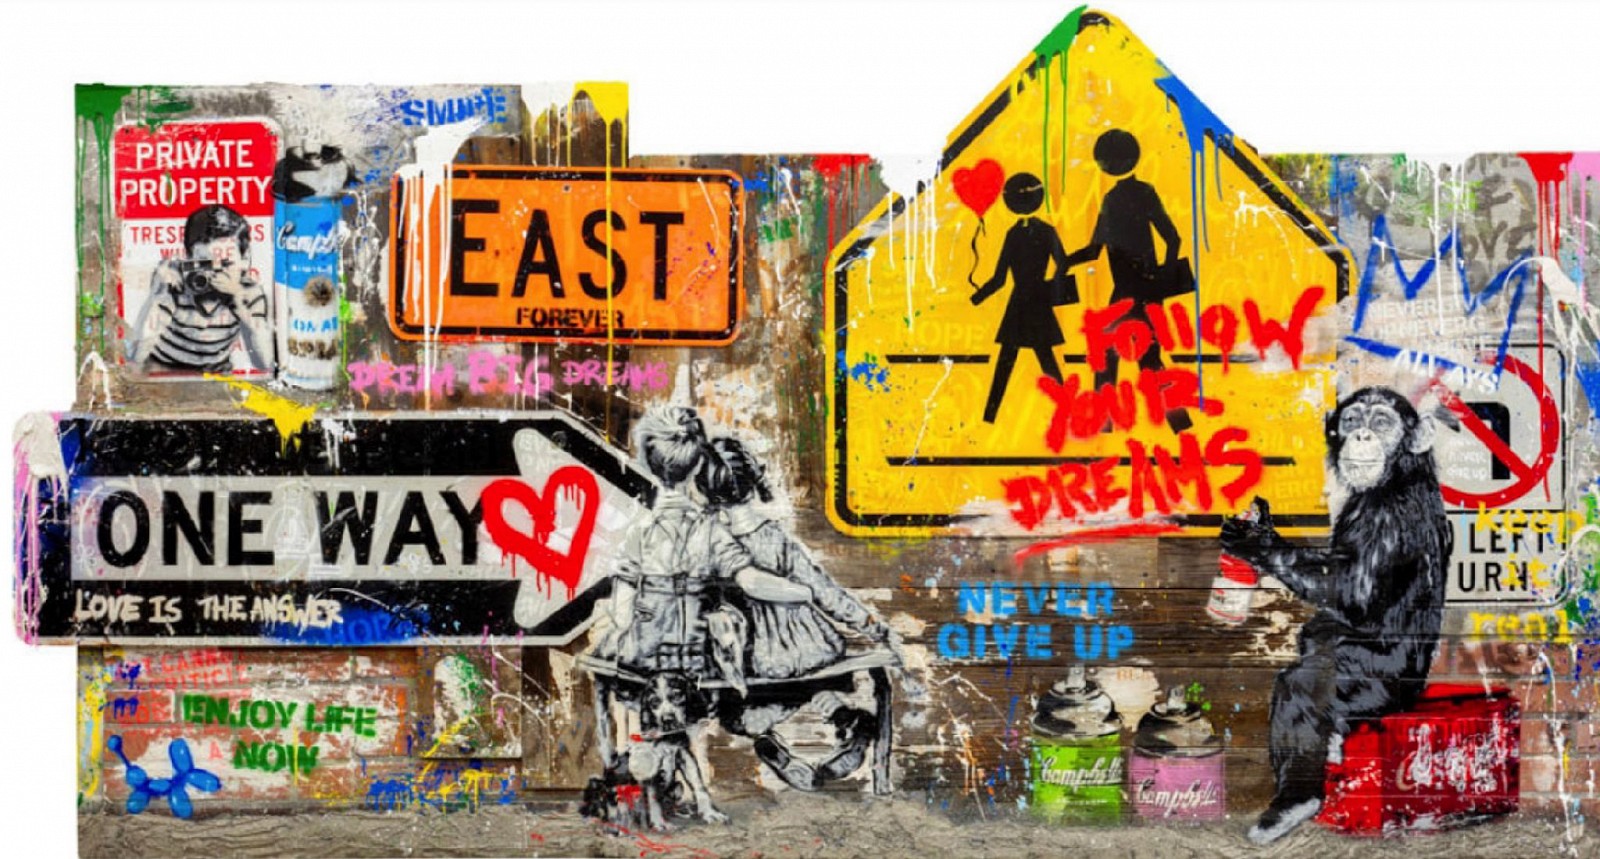 Mr. Brainwash, Pop Wall, 2023
Stencil and Mixed Media on Street Signs, Wood, Cement, and Brick Panel, 58 1/4 x 108 1/2 in.